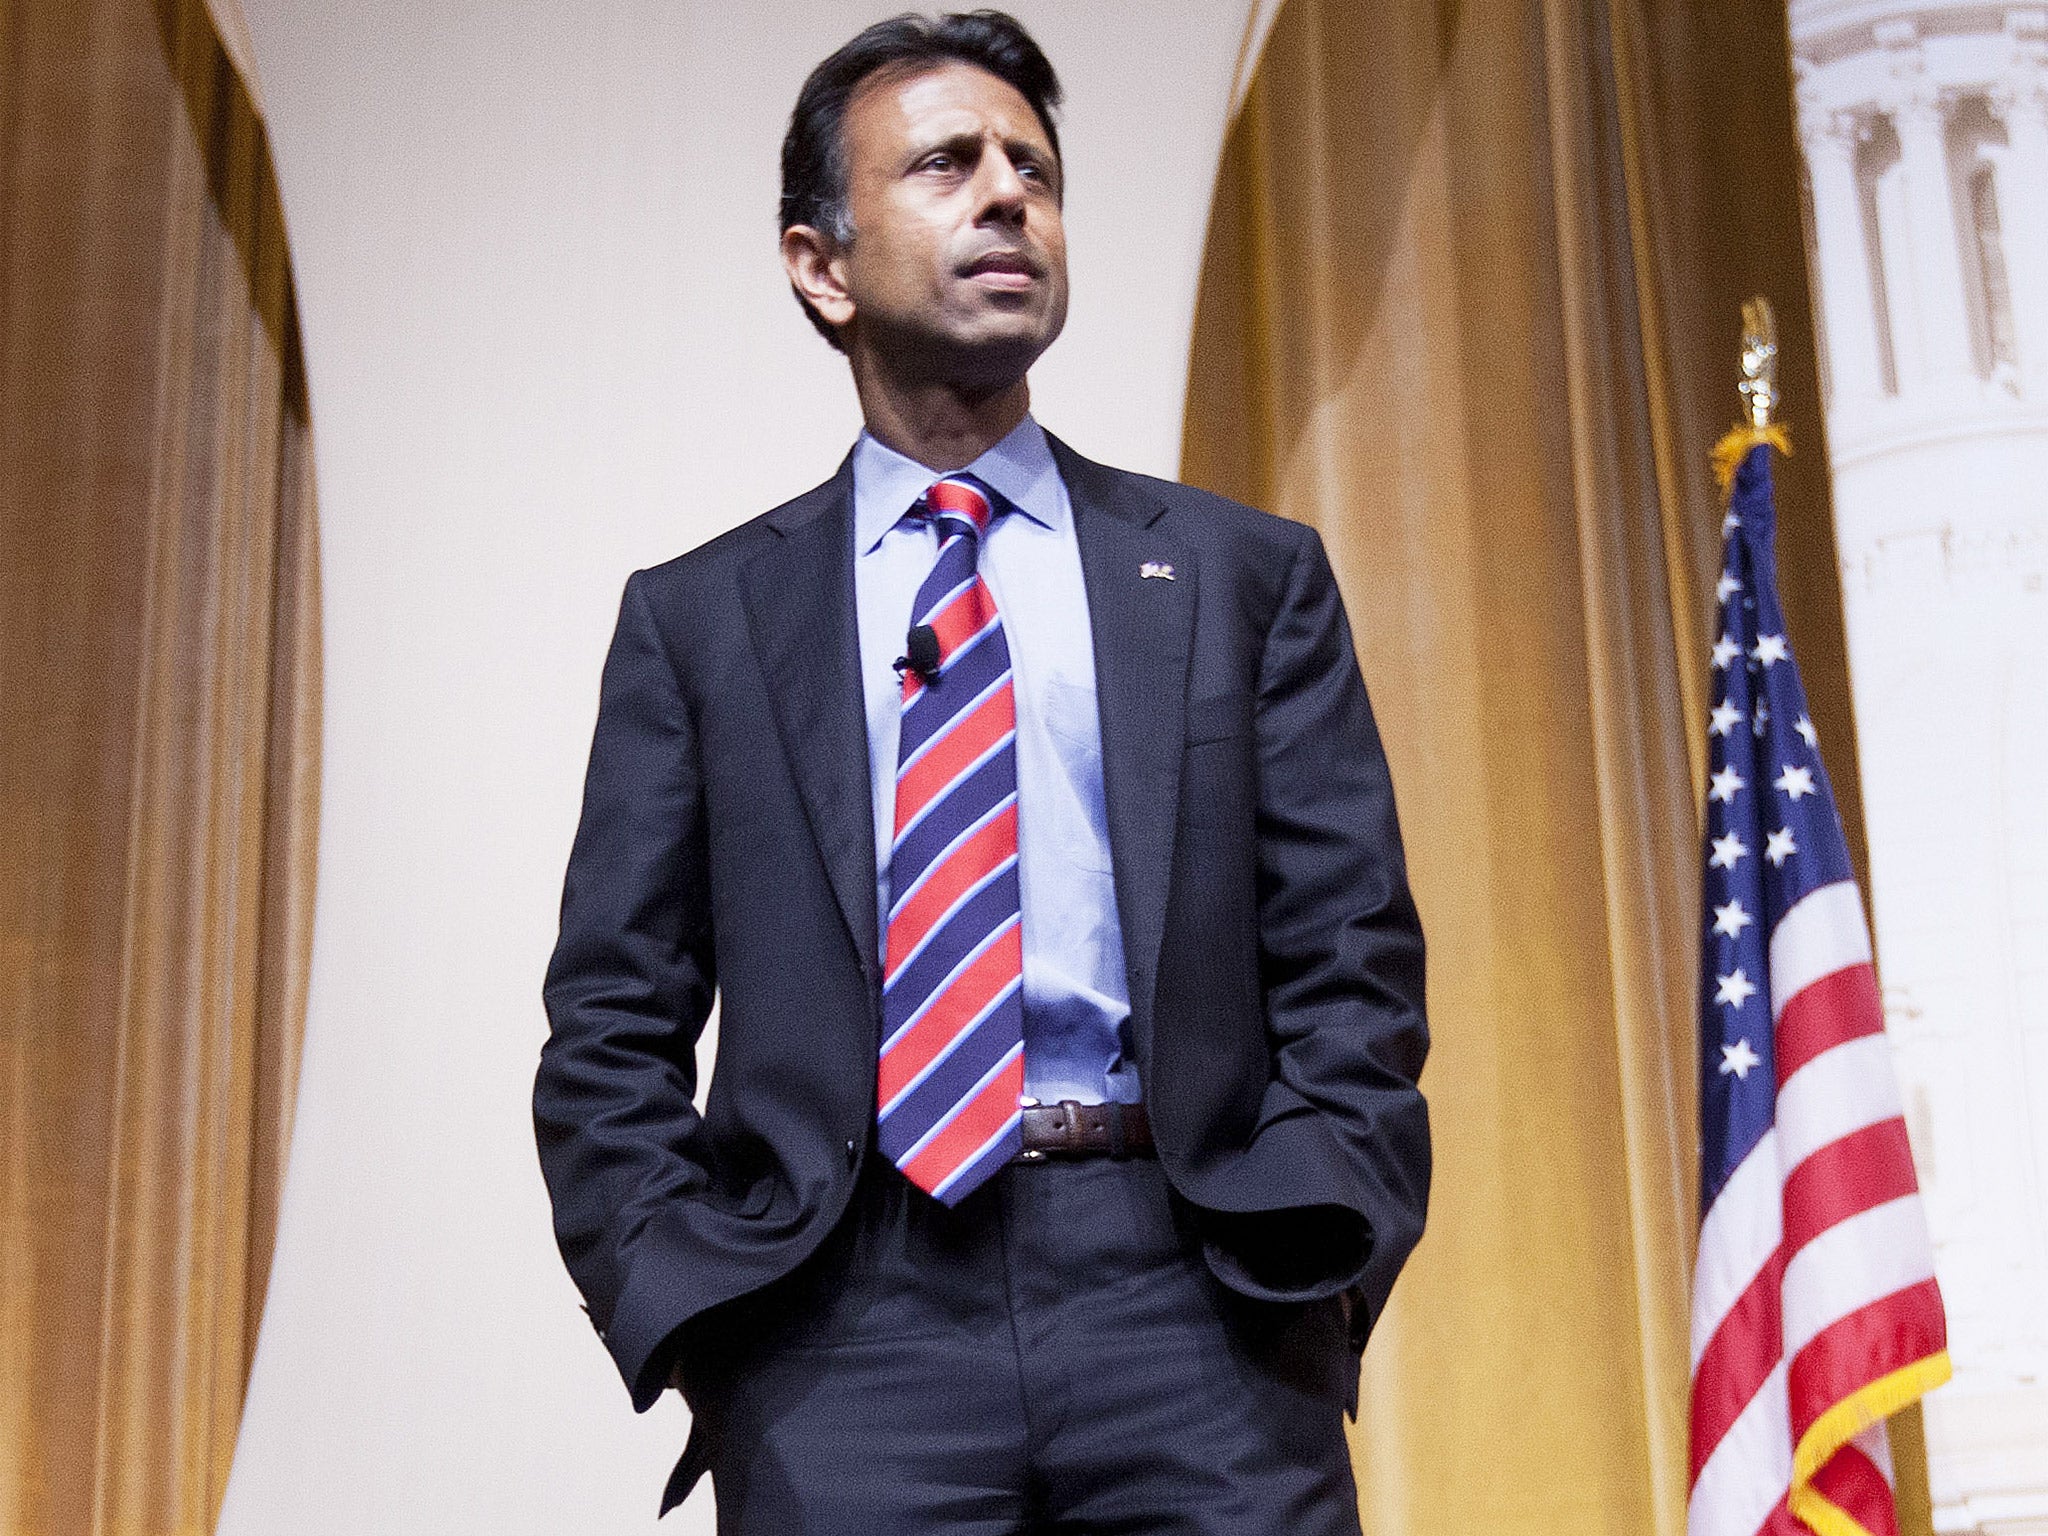 Governor Bobby Jindal, a former Hindu, has converted to Catholicism – but he may still struggle to attract votes form the Christian right wing of the Republican Party